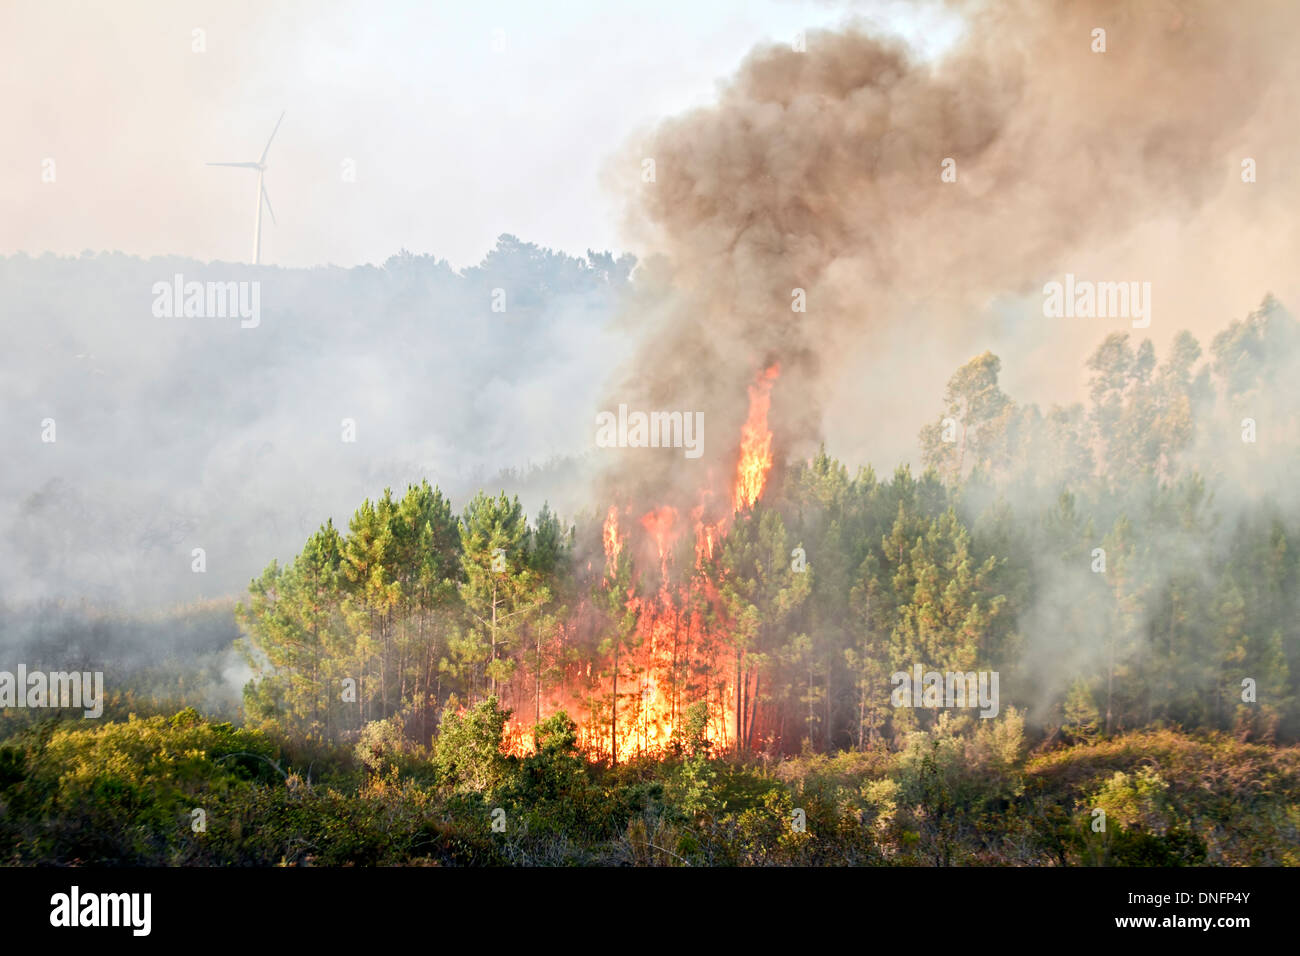 Big forest fire in the countryside from Portugal Stock Photo